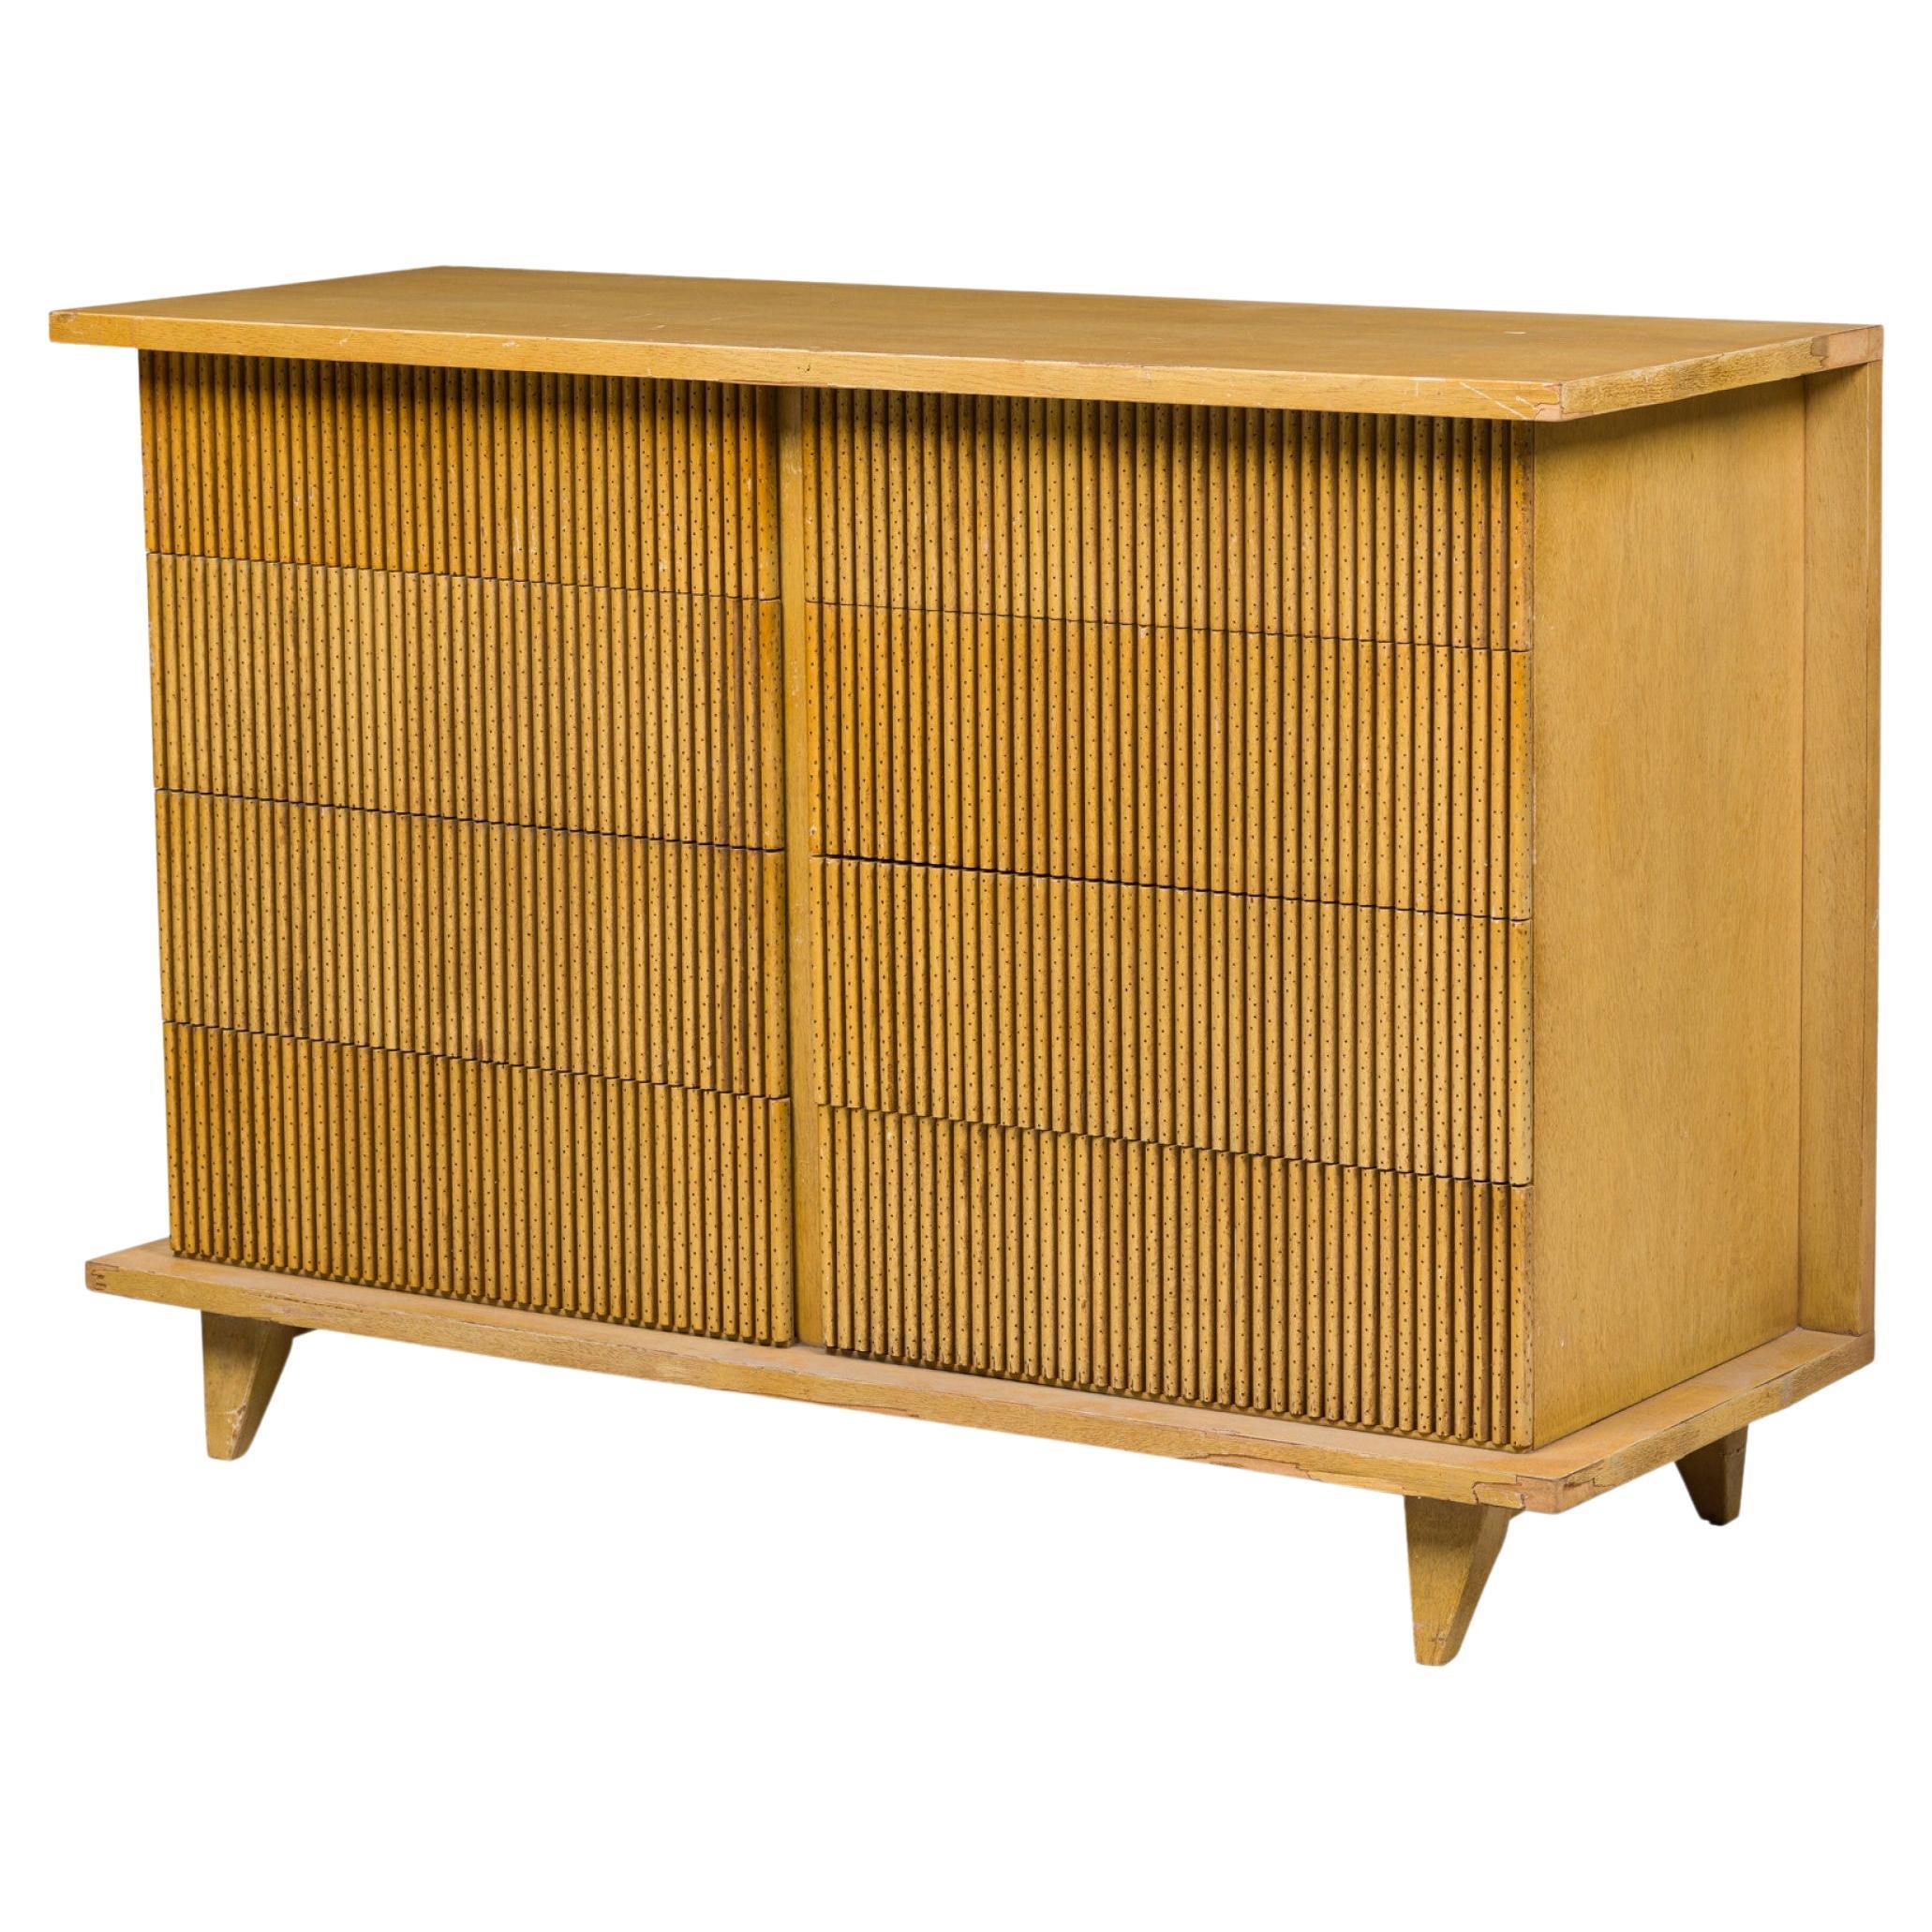 American midcentury (1960s) bleached mahogany chest / dresser with 8 drawers in two parallel columns with reeded faux-bamboo fronts, resting on four square tapered legs. (American of Martinsville).